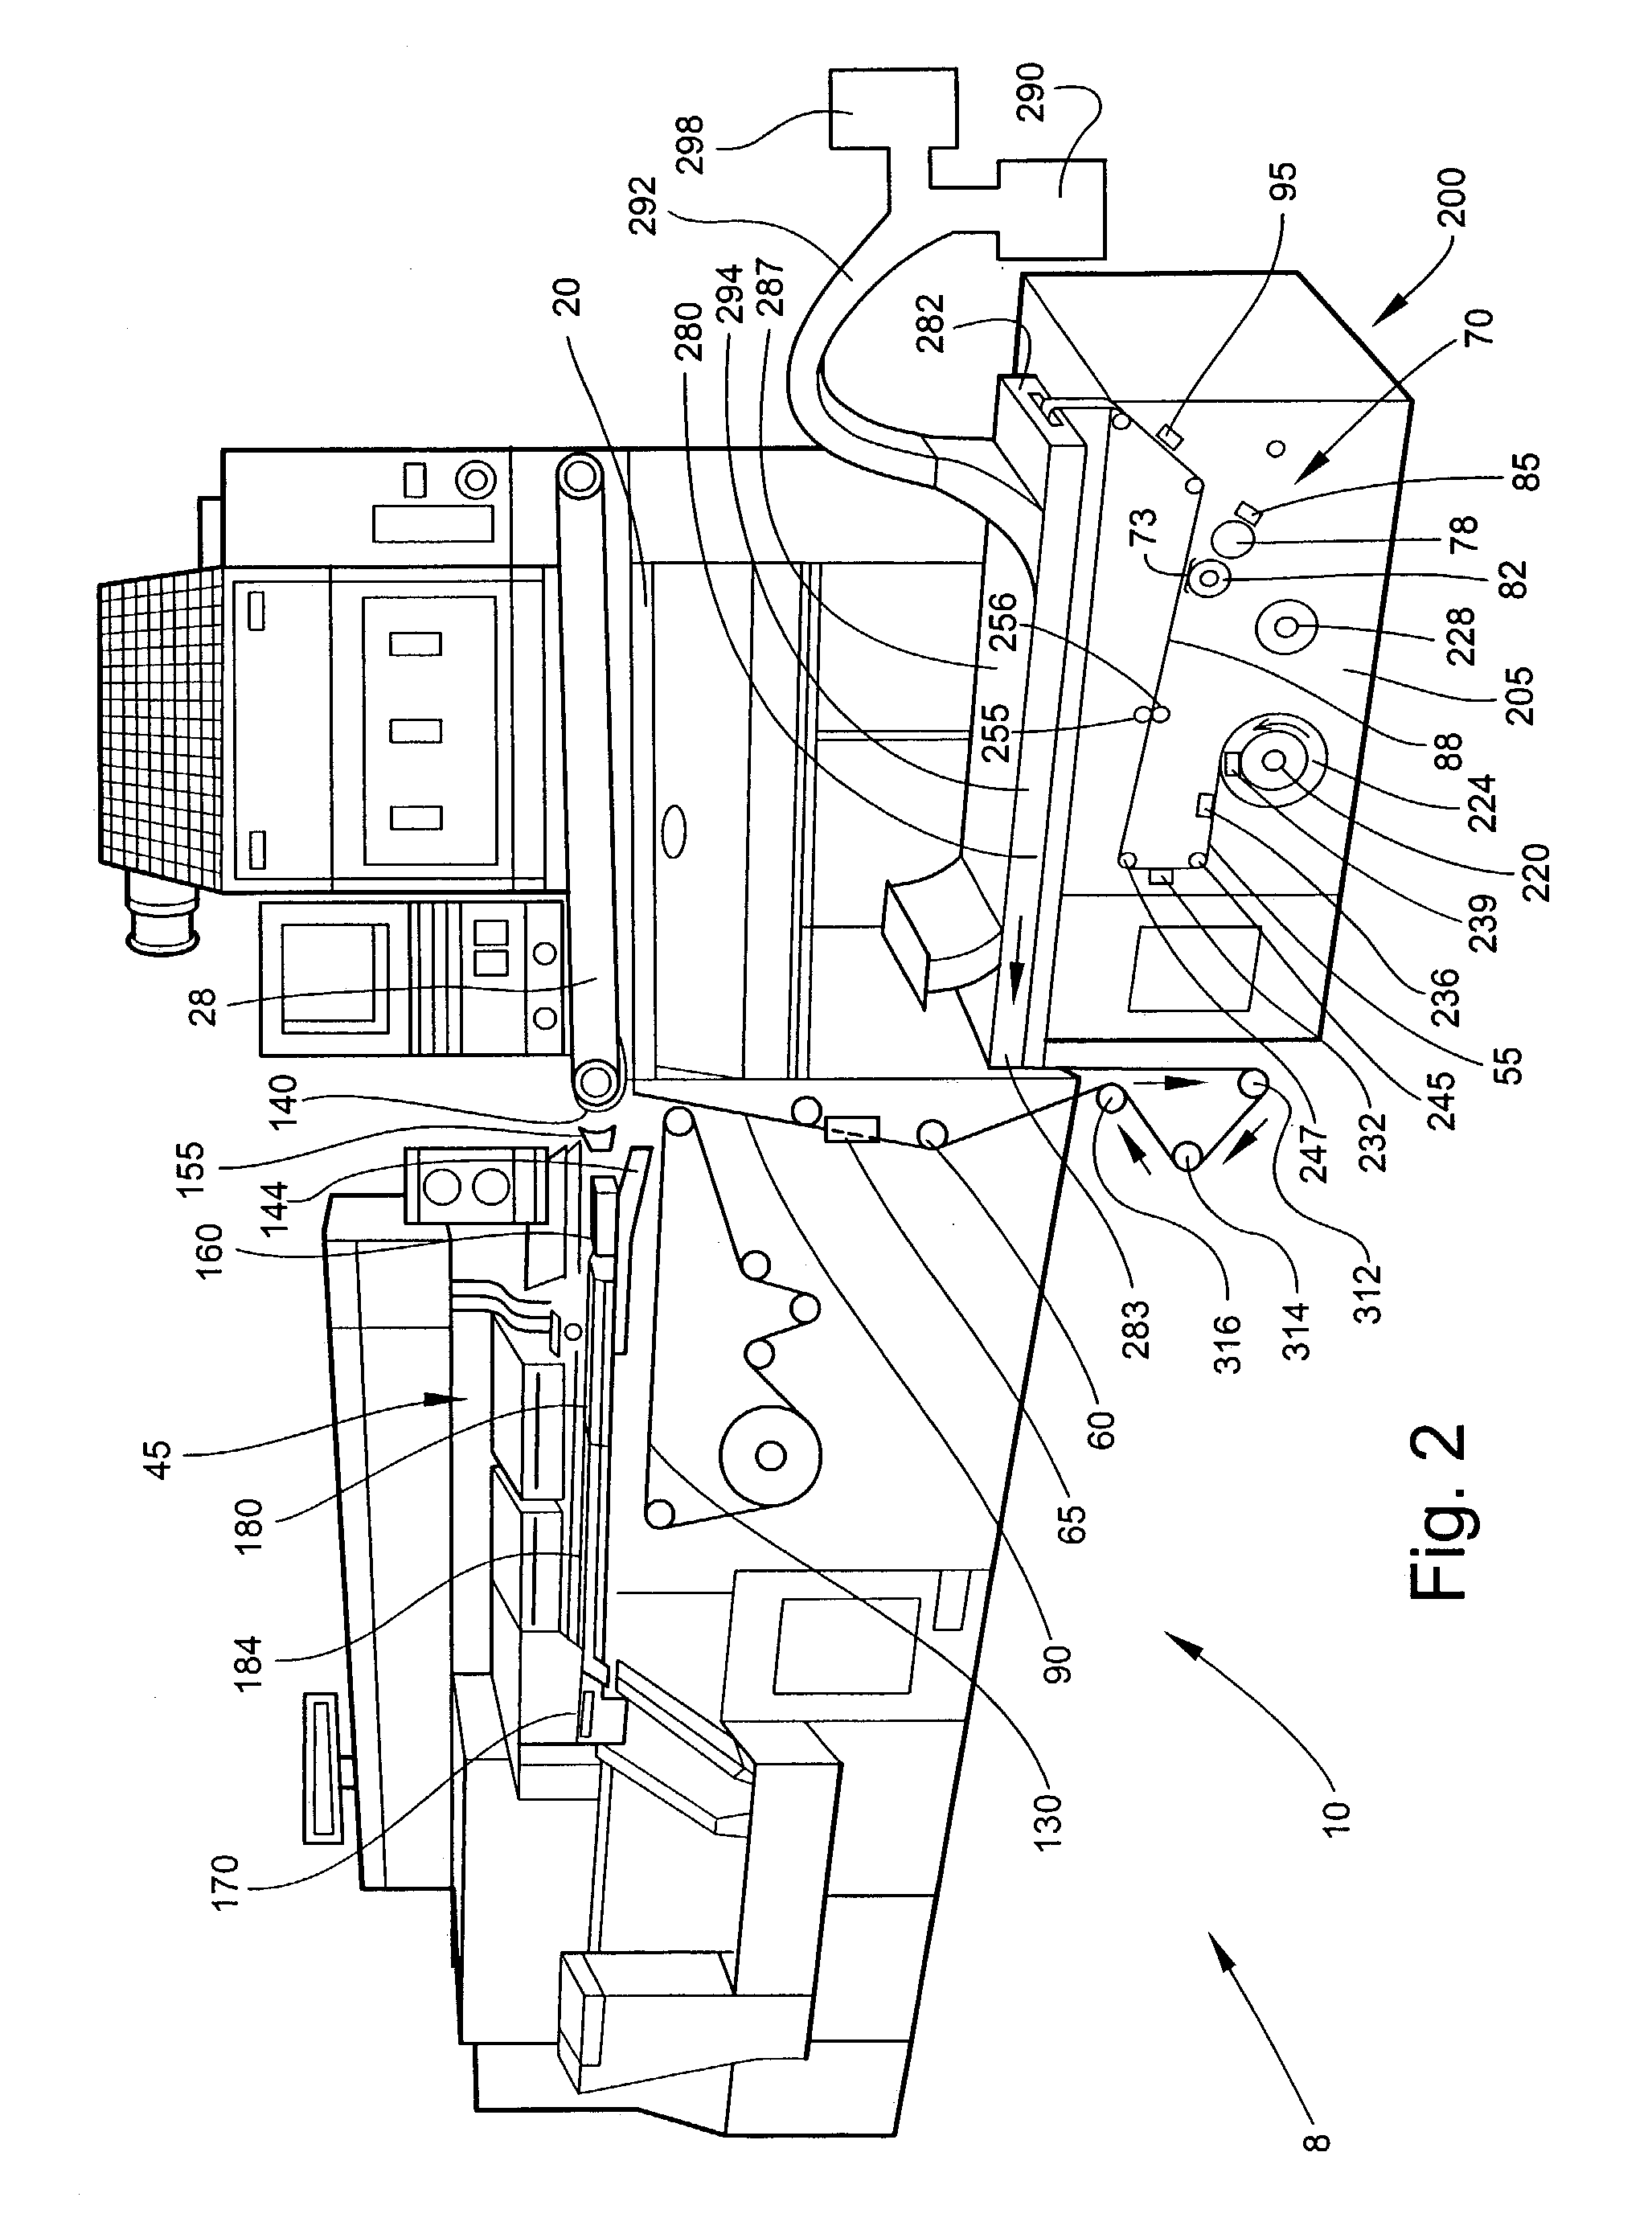 Equipment and methods for manufacturing cigarettes